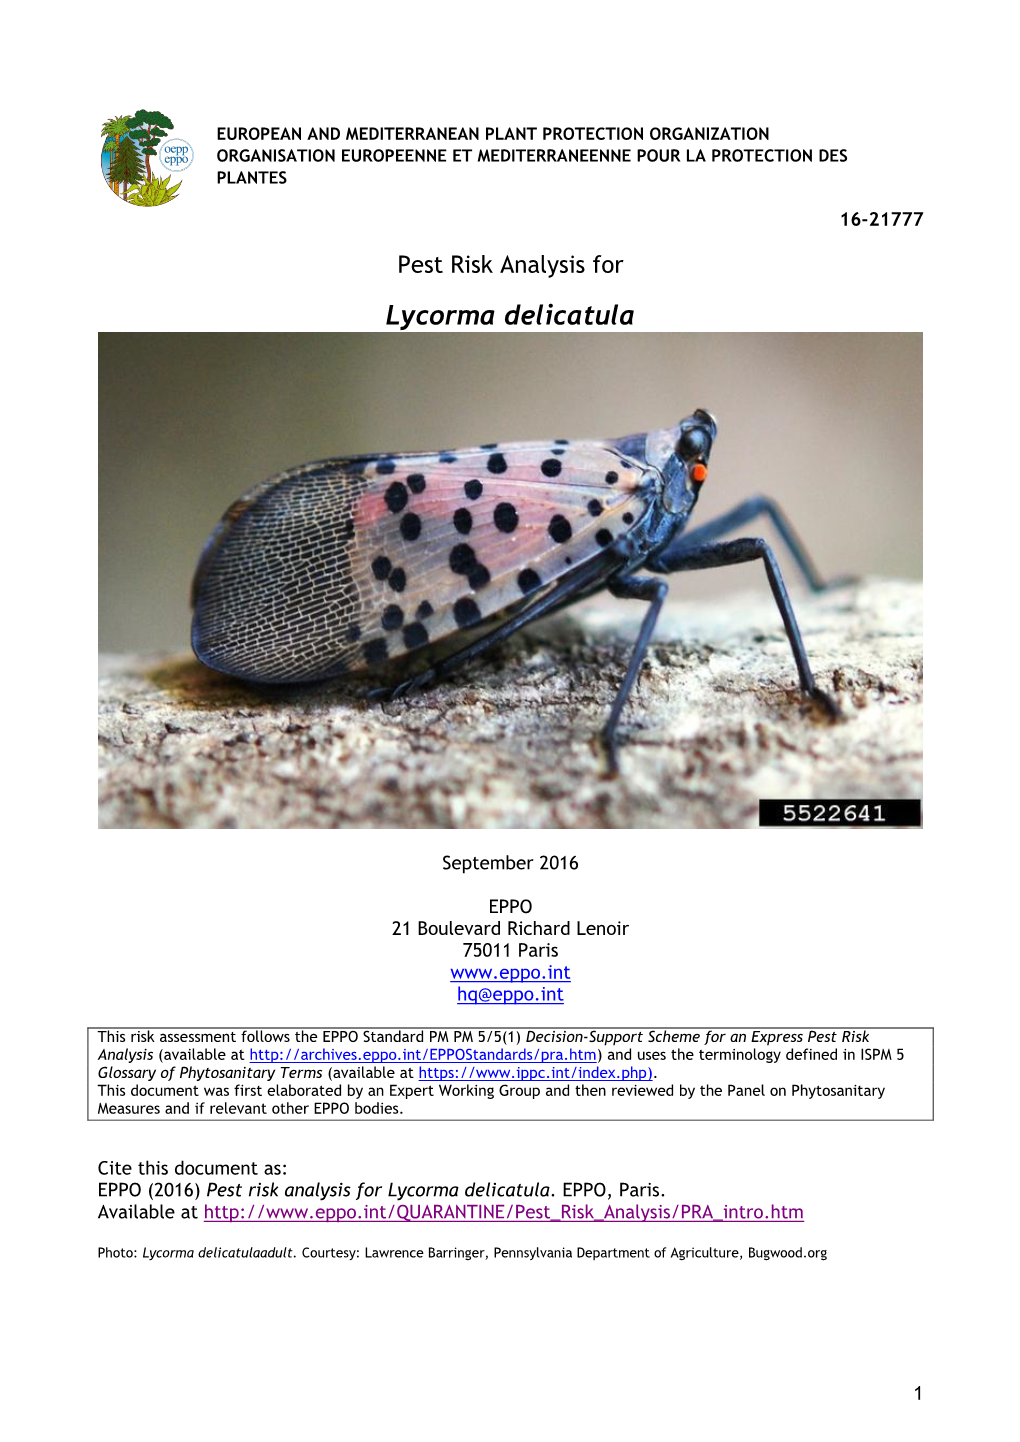 Pest Risk Analysis for Lycorma Delicatula